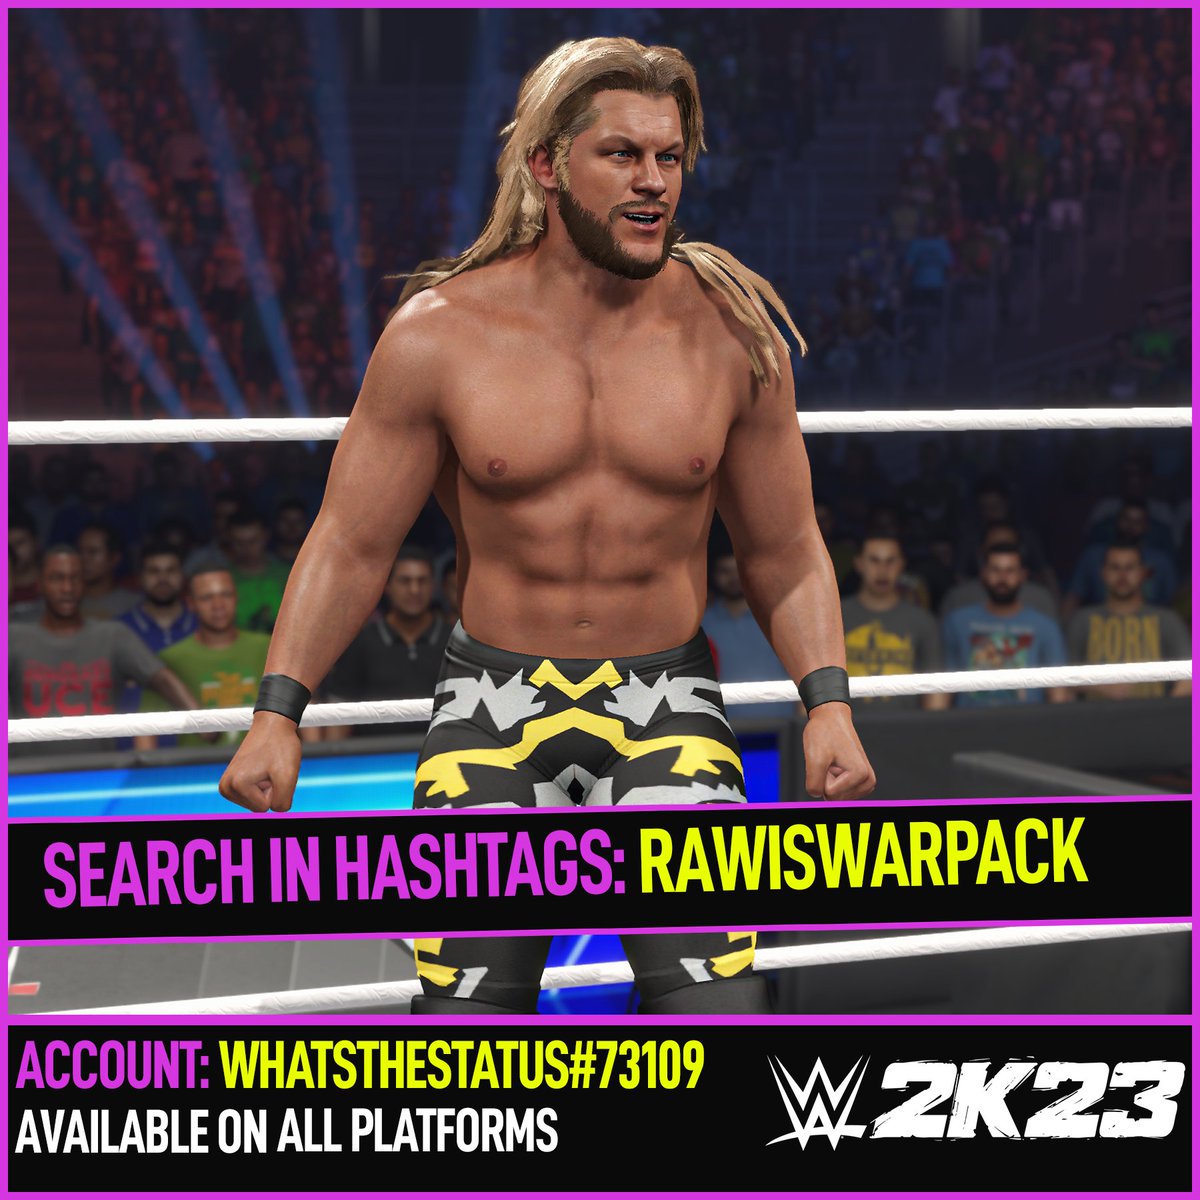 NEW! #WWE2K23 Upload To Community Creations! ★ Chris Jericho '00 ★ Search Tag → RAWISWARPACK or WhatsTheStatus ★ Collaboration with @Azorthious + @kaaalua , @GameVolt1 , @Skymovesets, & @foreignferal ★ INCLUDES ● Custom Portrait ● Ring Announcer Name (Chris jerry cole)…